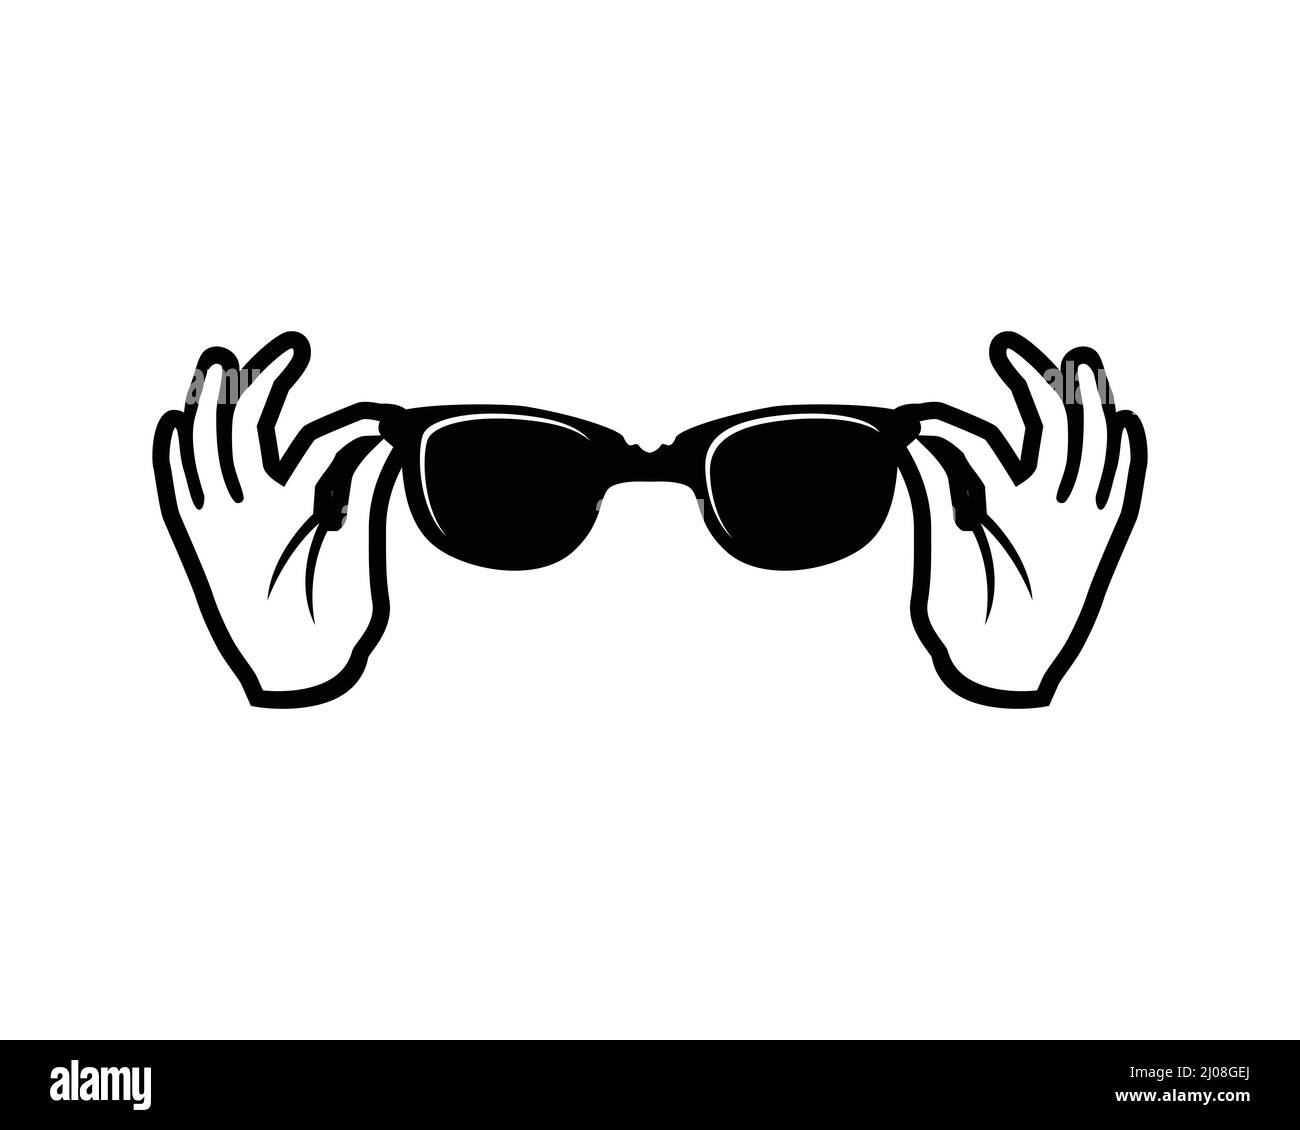 Cool and Classy Gesture with Glasses Stock Vector